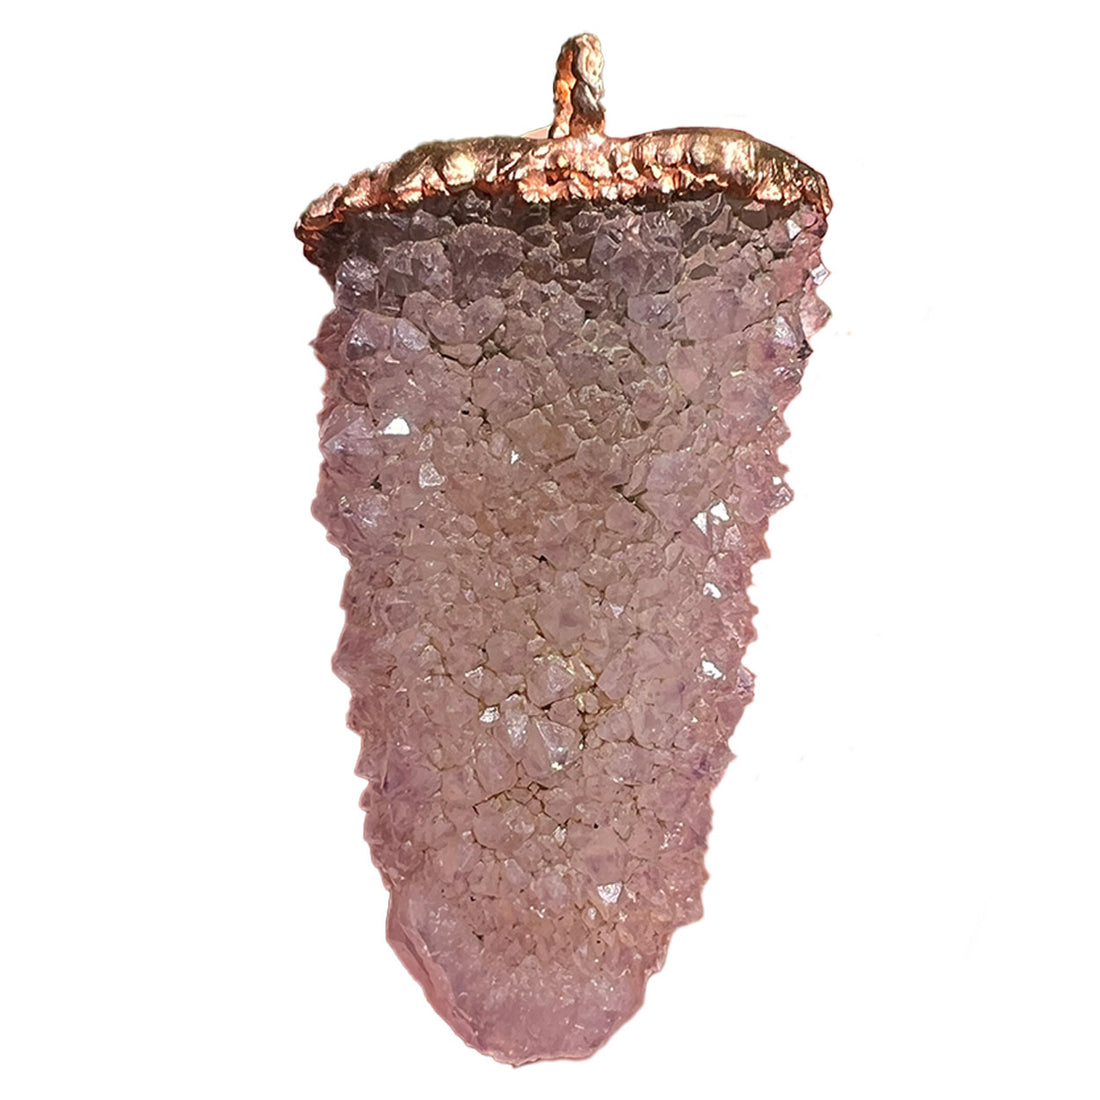 High-resolution image of a spirit quartz pendant with copper detailing isolated on white background